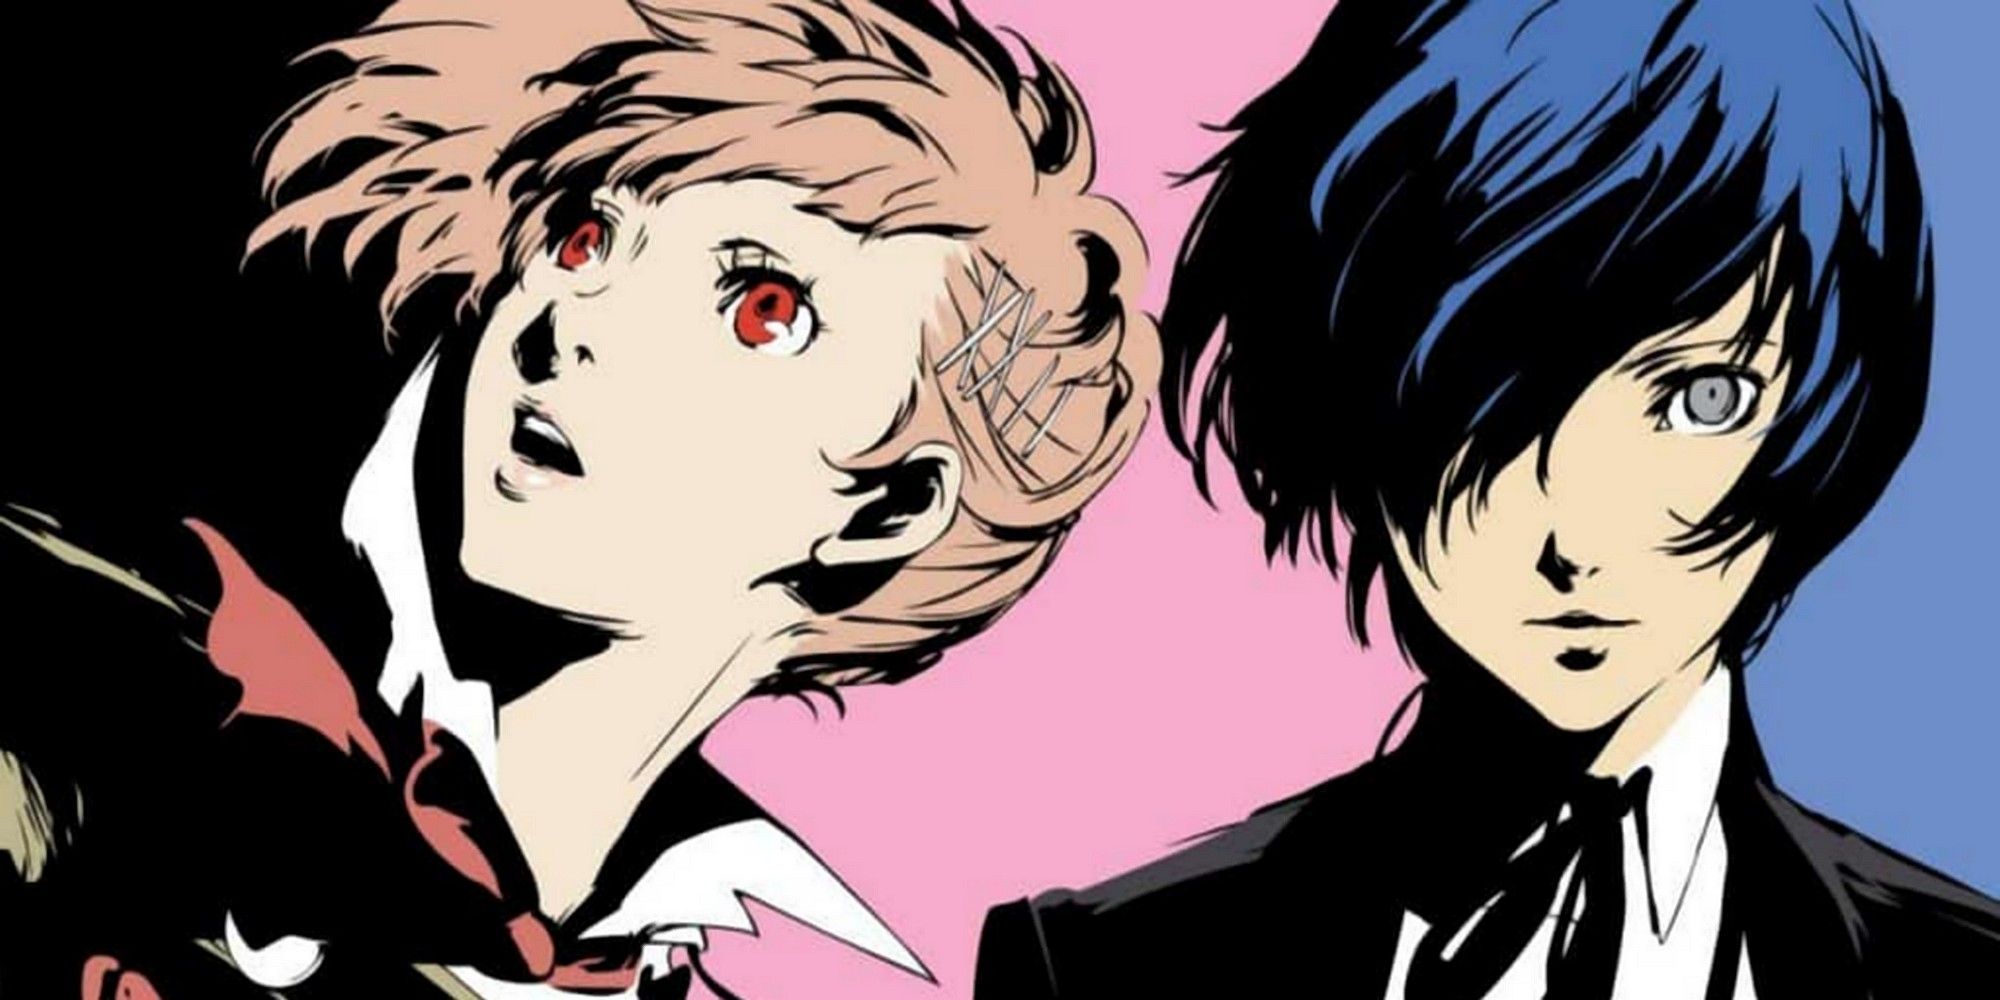 persona 3 portable's two protagonists on a pink and blue background